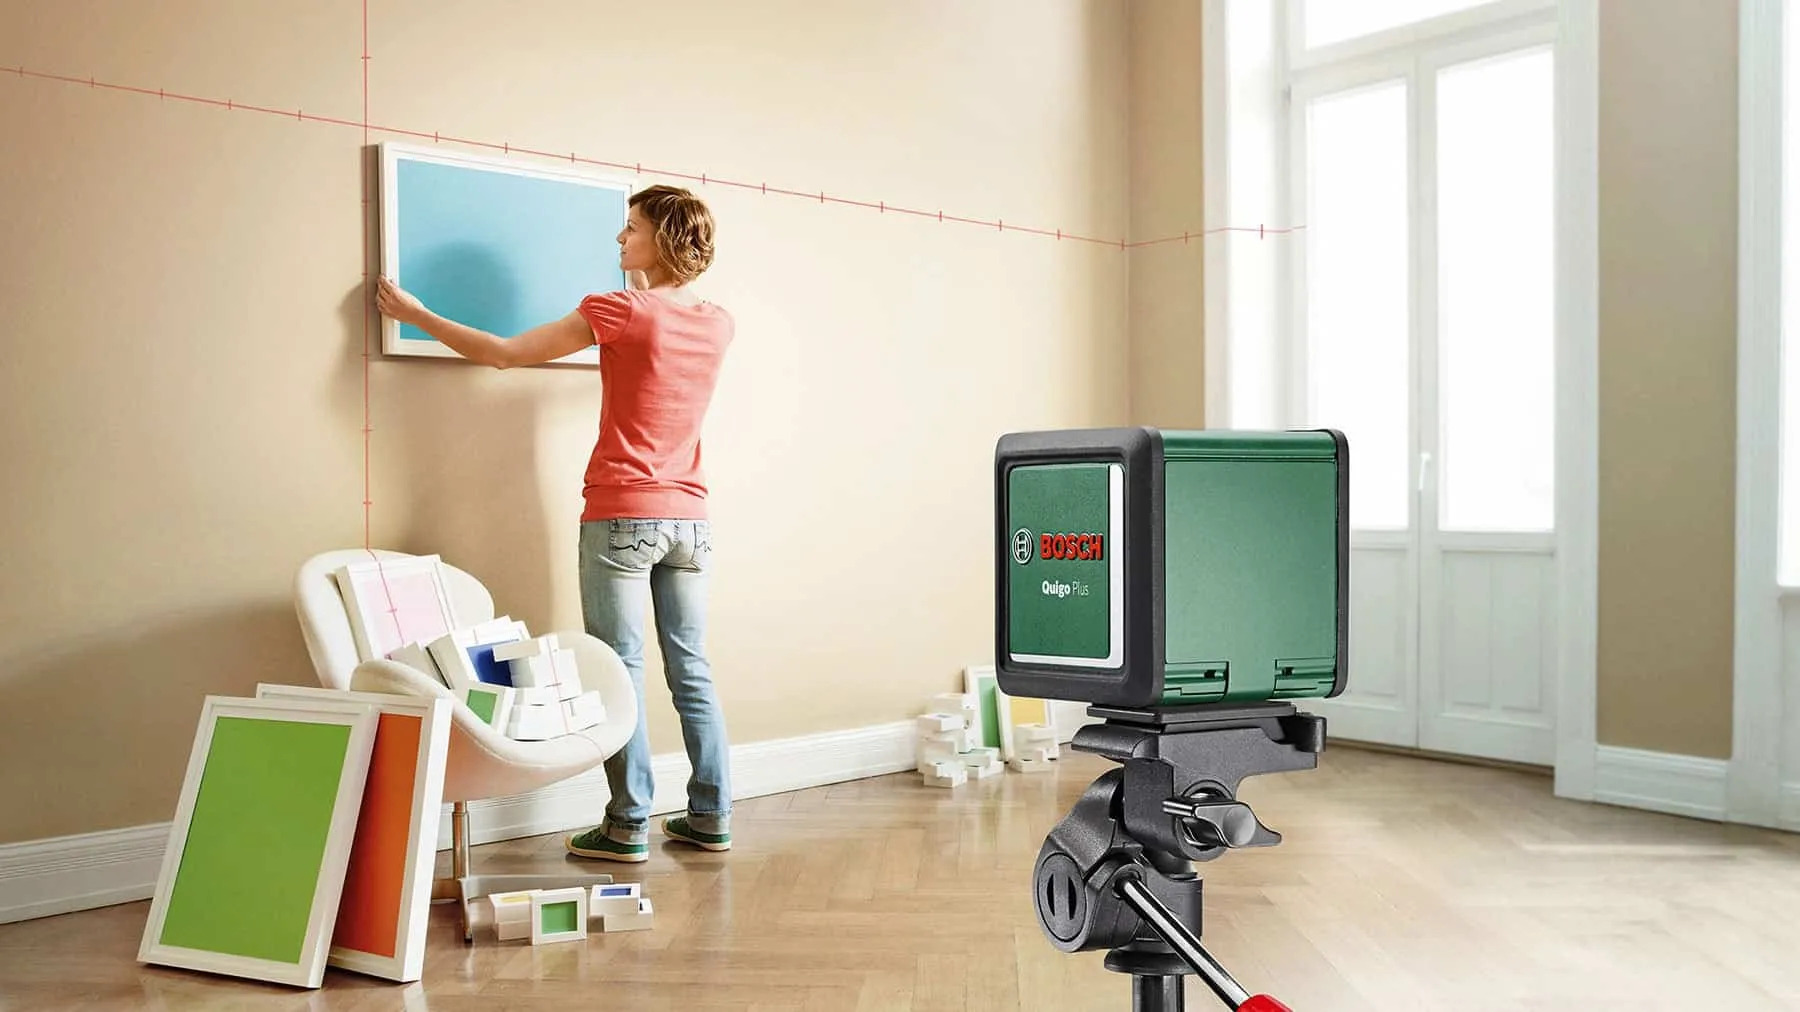 How To Use Laser Level To Hang Pictures